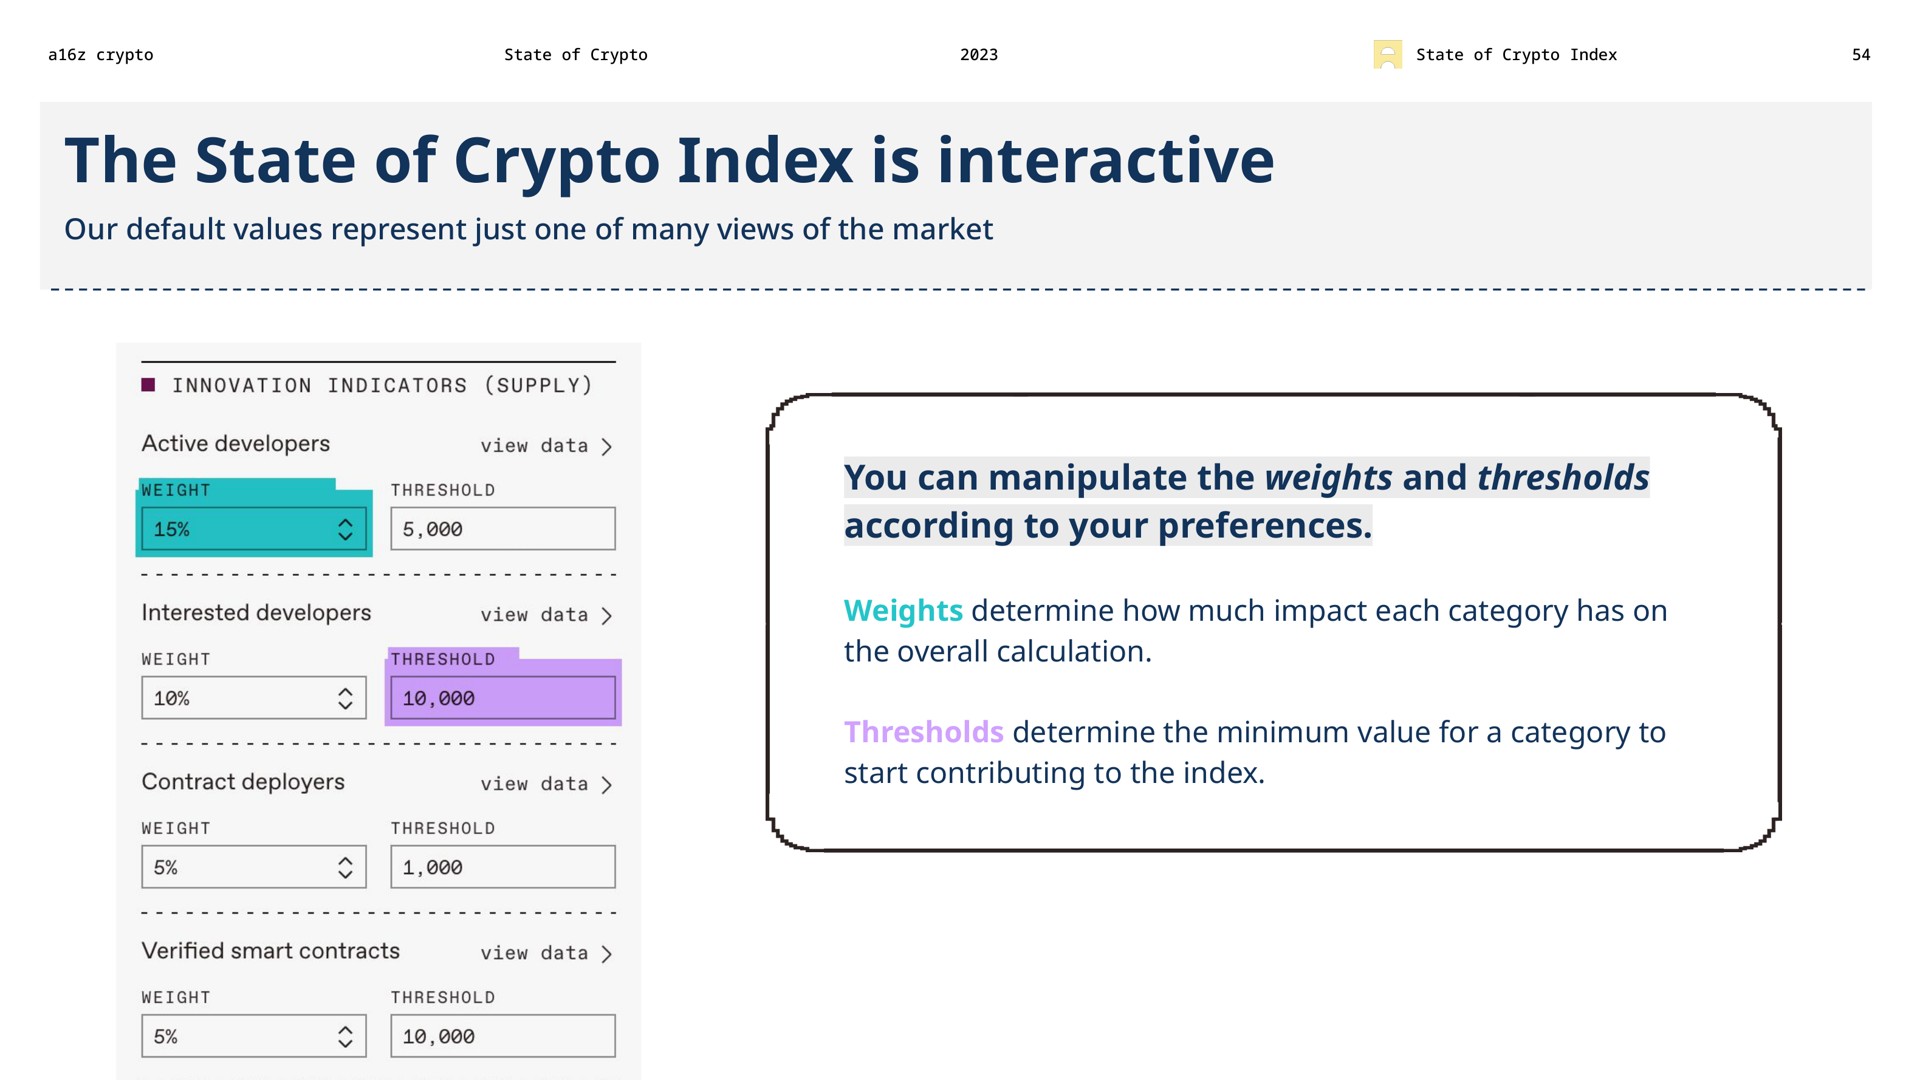 the state of index is interactive you can manipulate the weights and thresholds according to your preferences our default values represent just one many views market determine how much impact each category has on overall calculation determine minimum value for a category start contributing | a16z